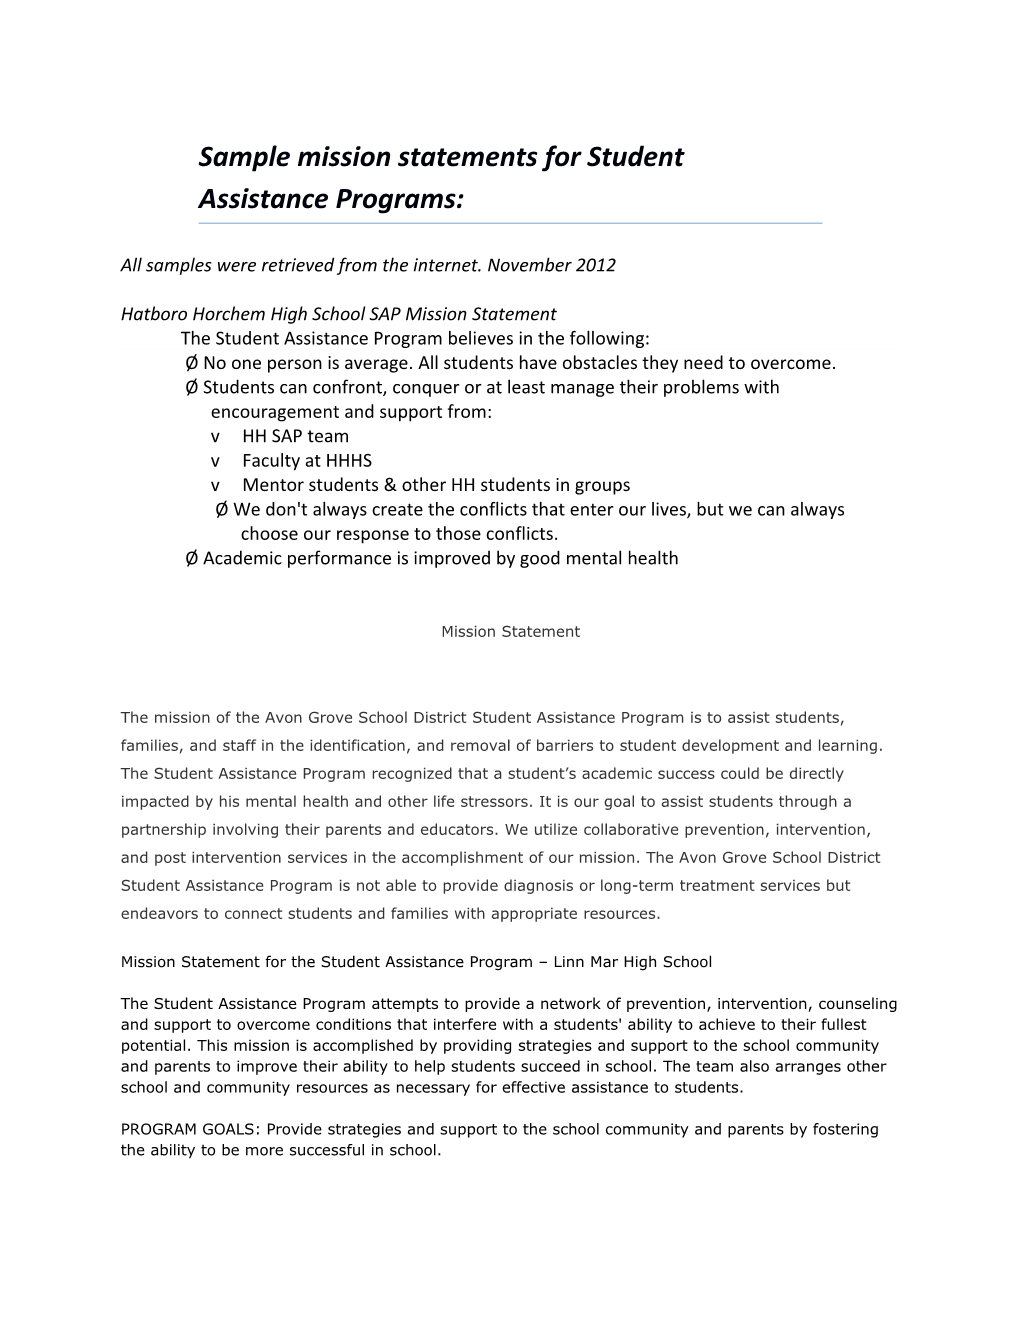 Sample Mission Statements for Student Assistance Programs